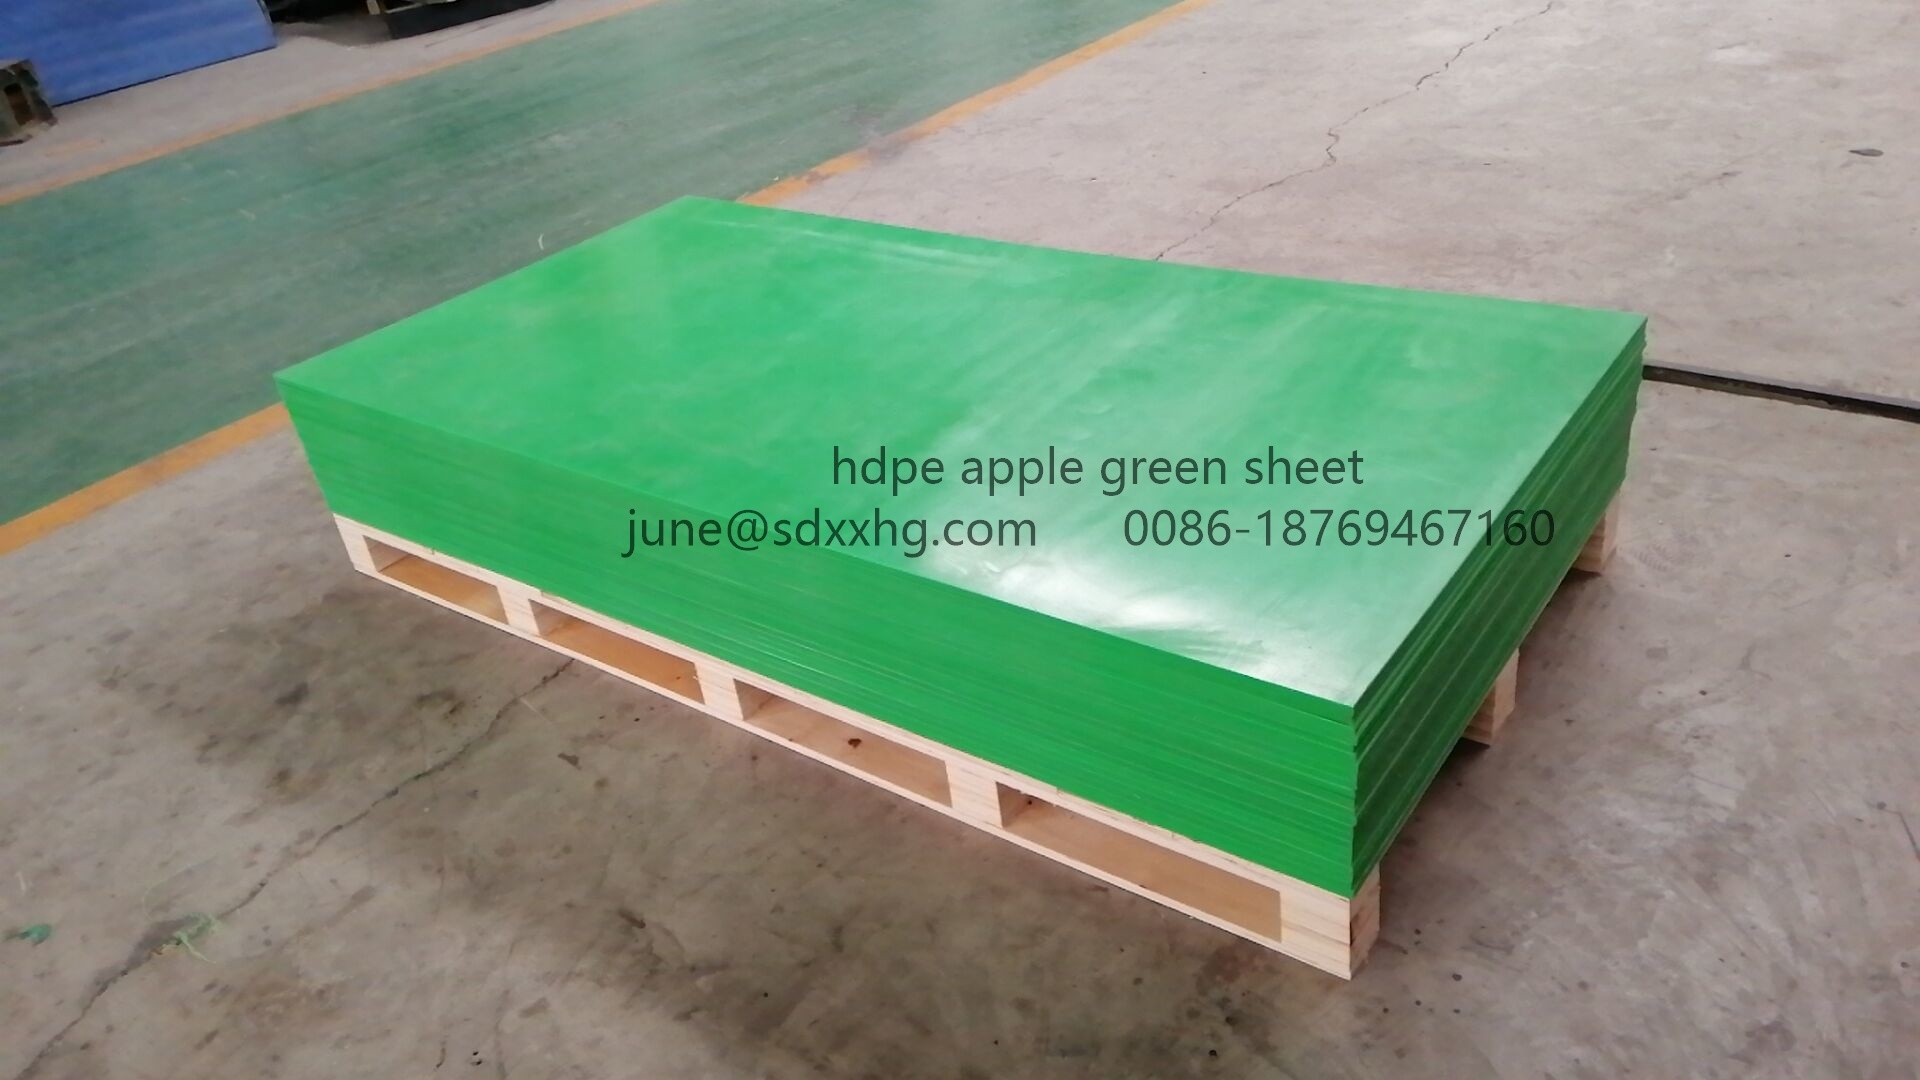 wear resistant polyethylene guard , hdpe sheet with rough surface and texture surface 